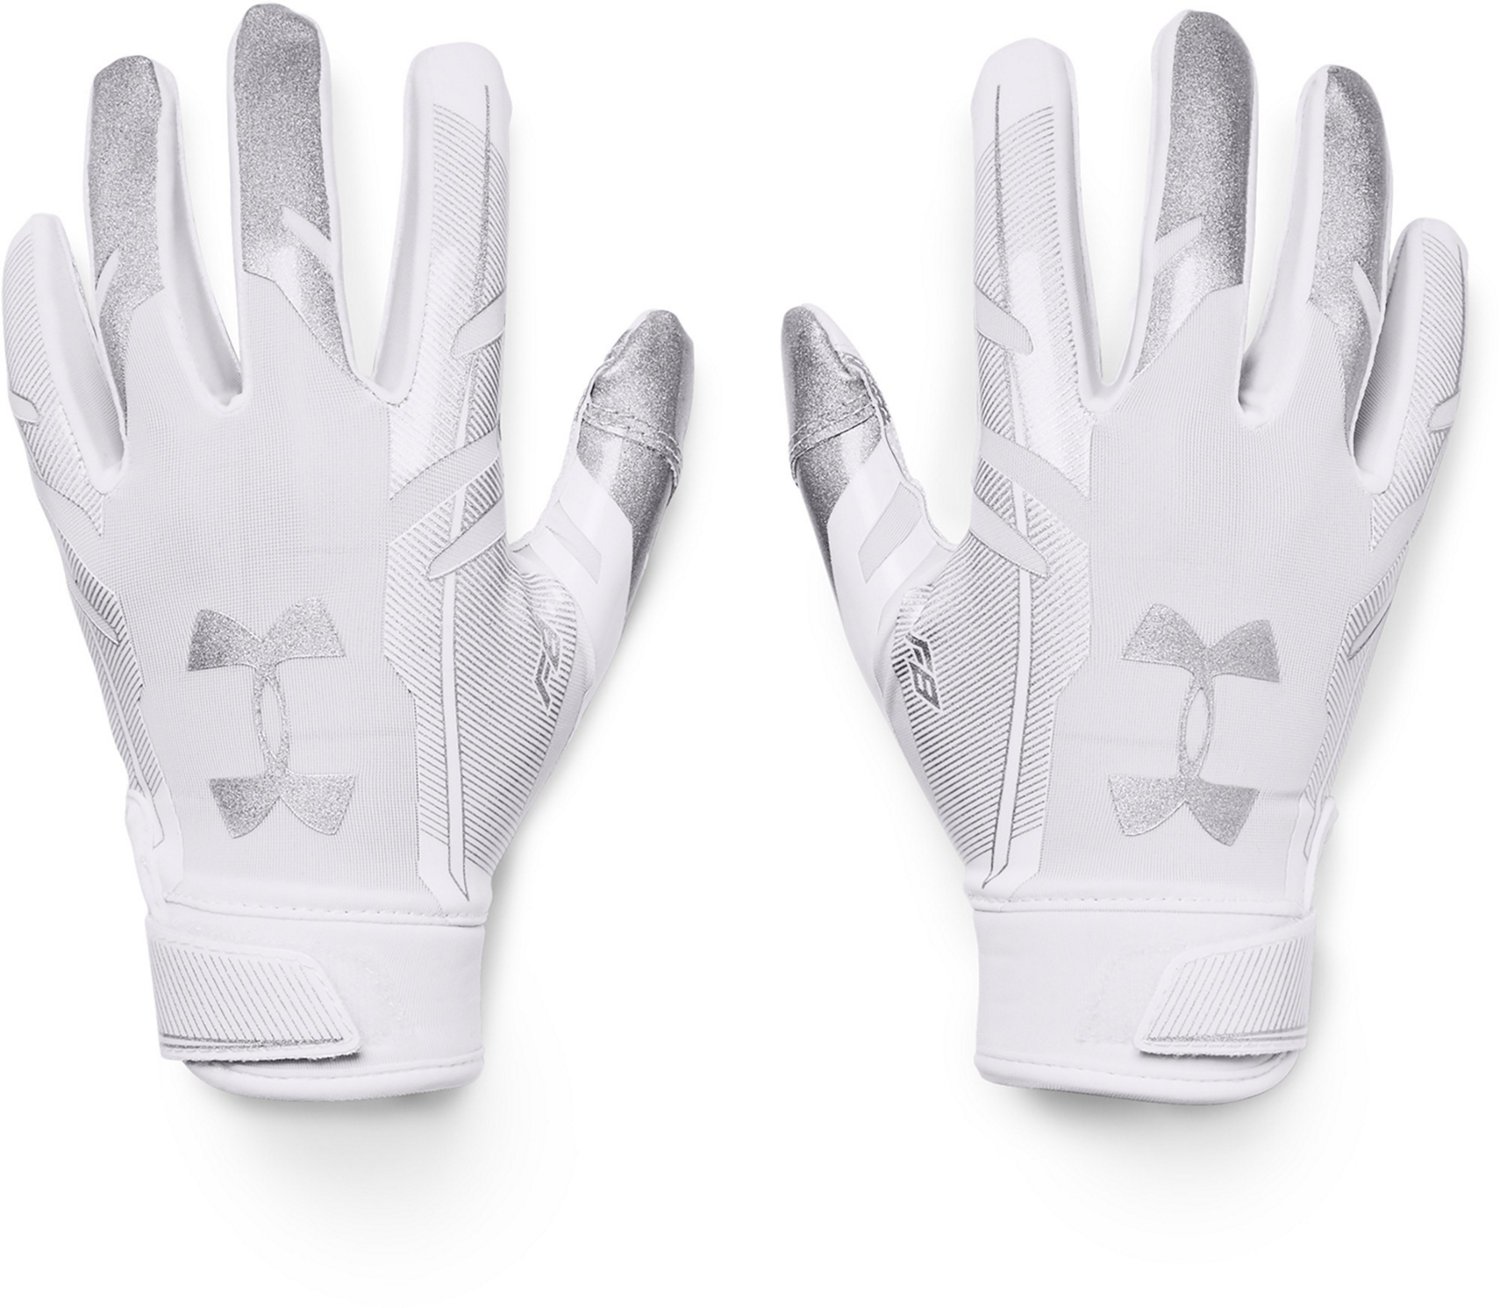 Under Armour Kids Pee Wee F8 Football Gloves